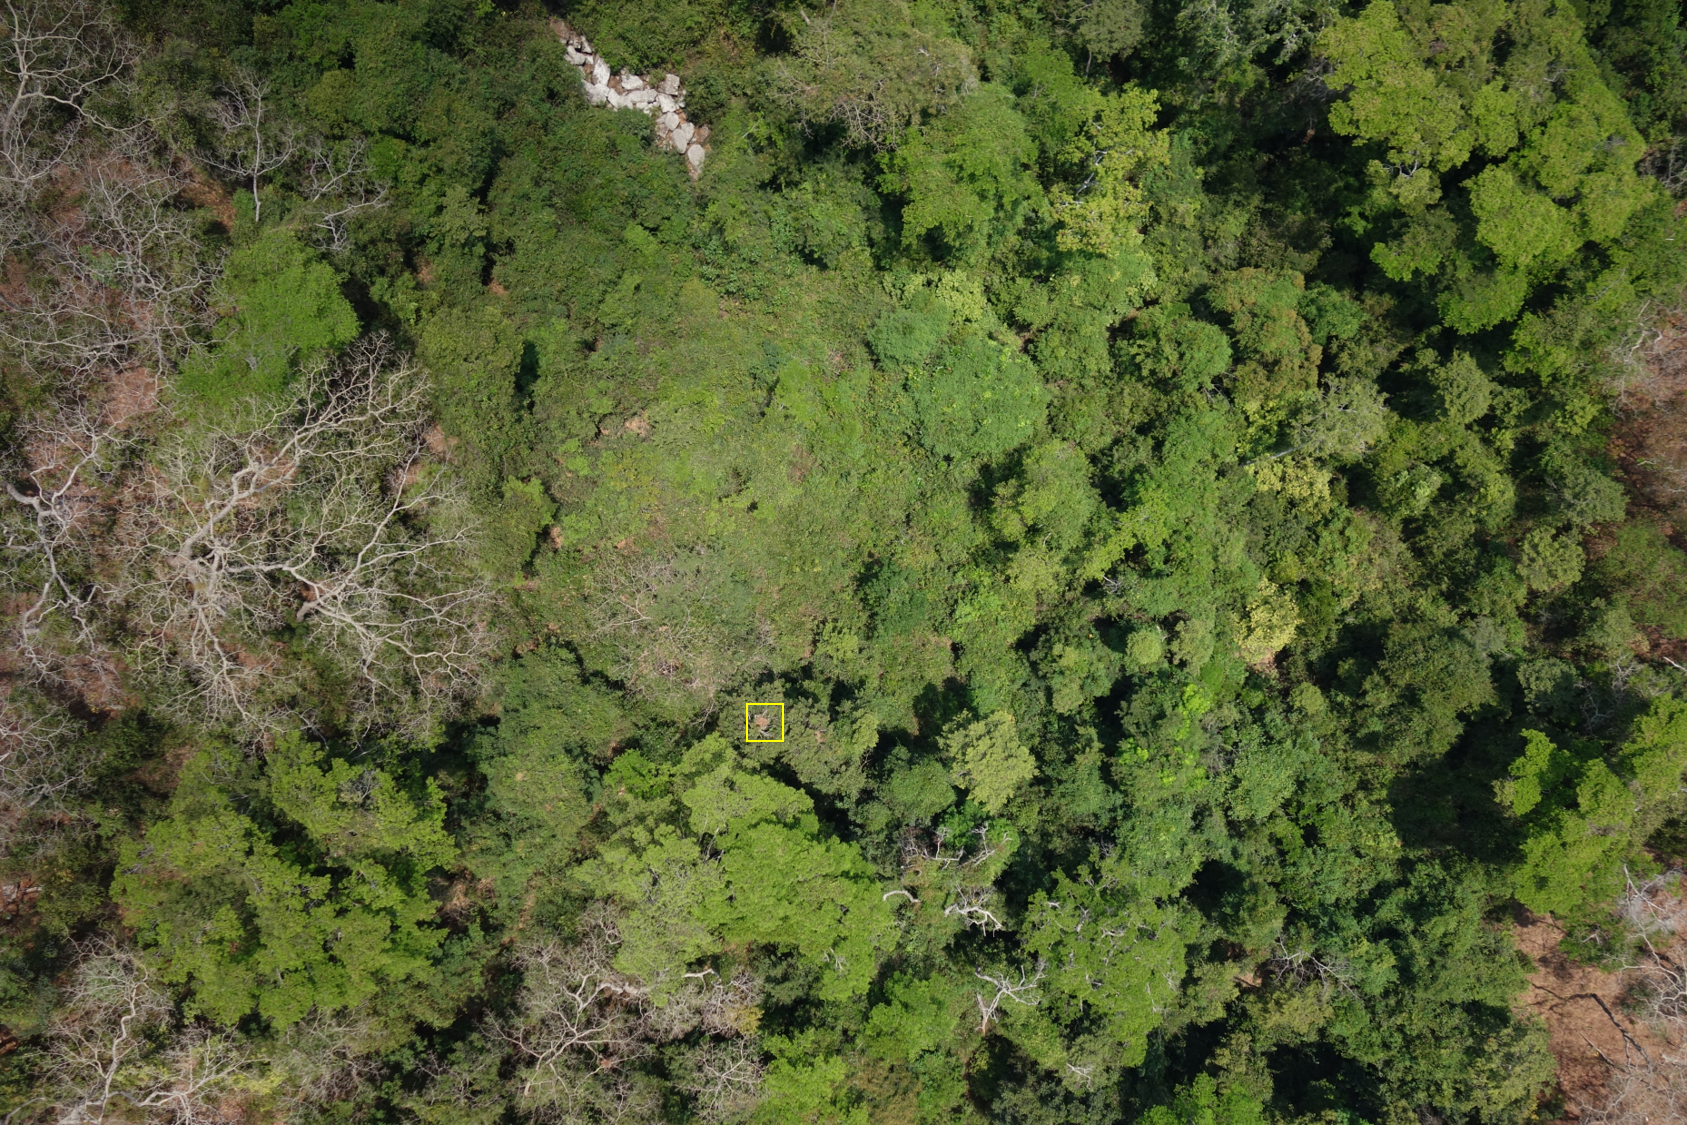 A chimp nest highlighted from the air.